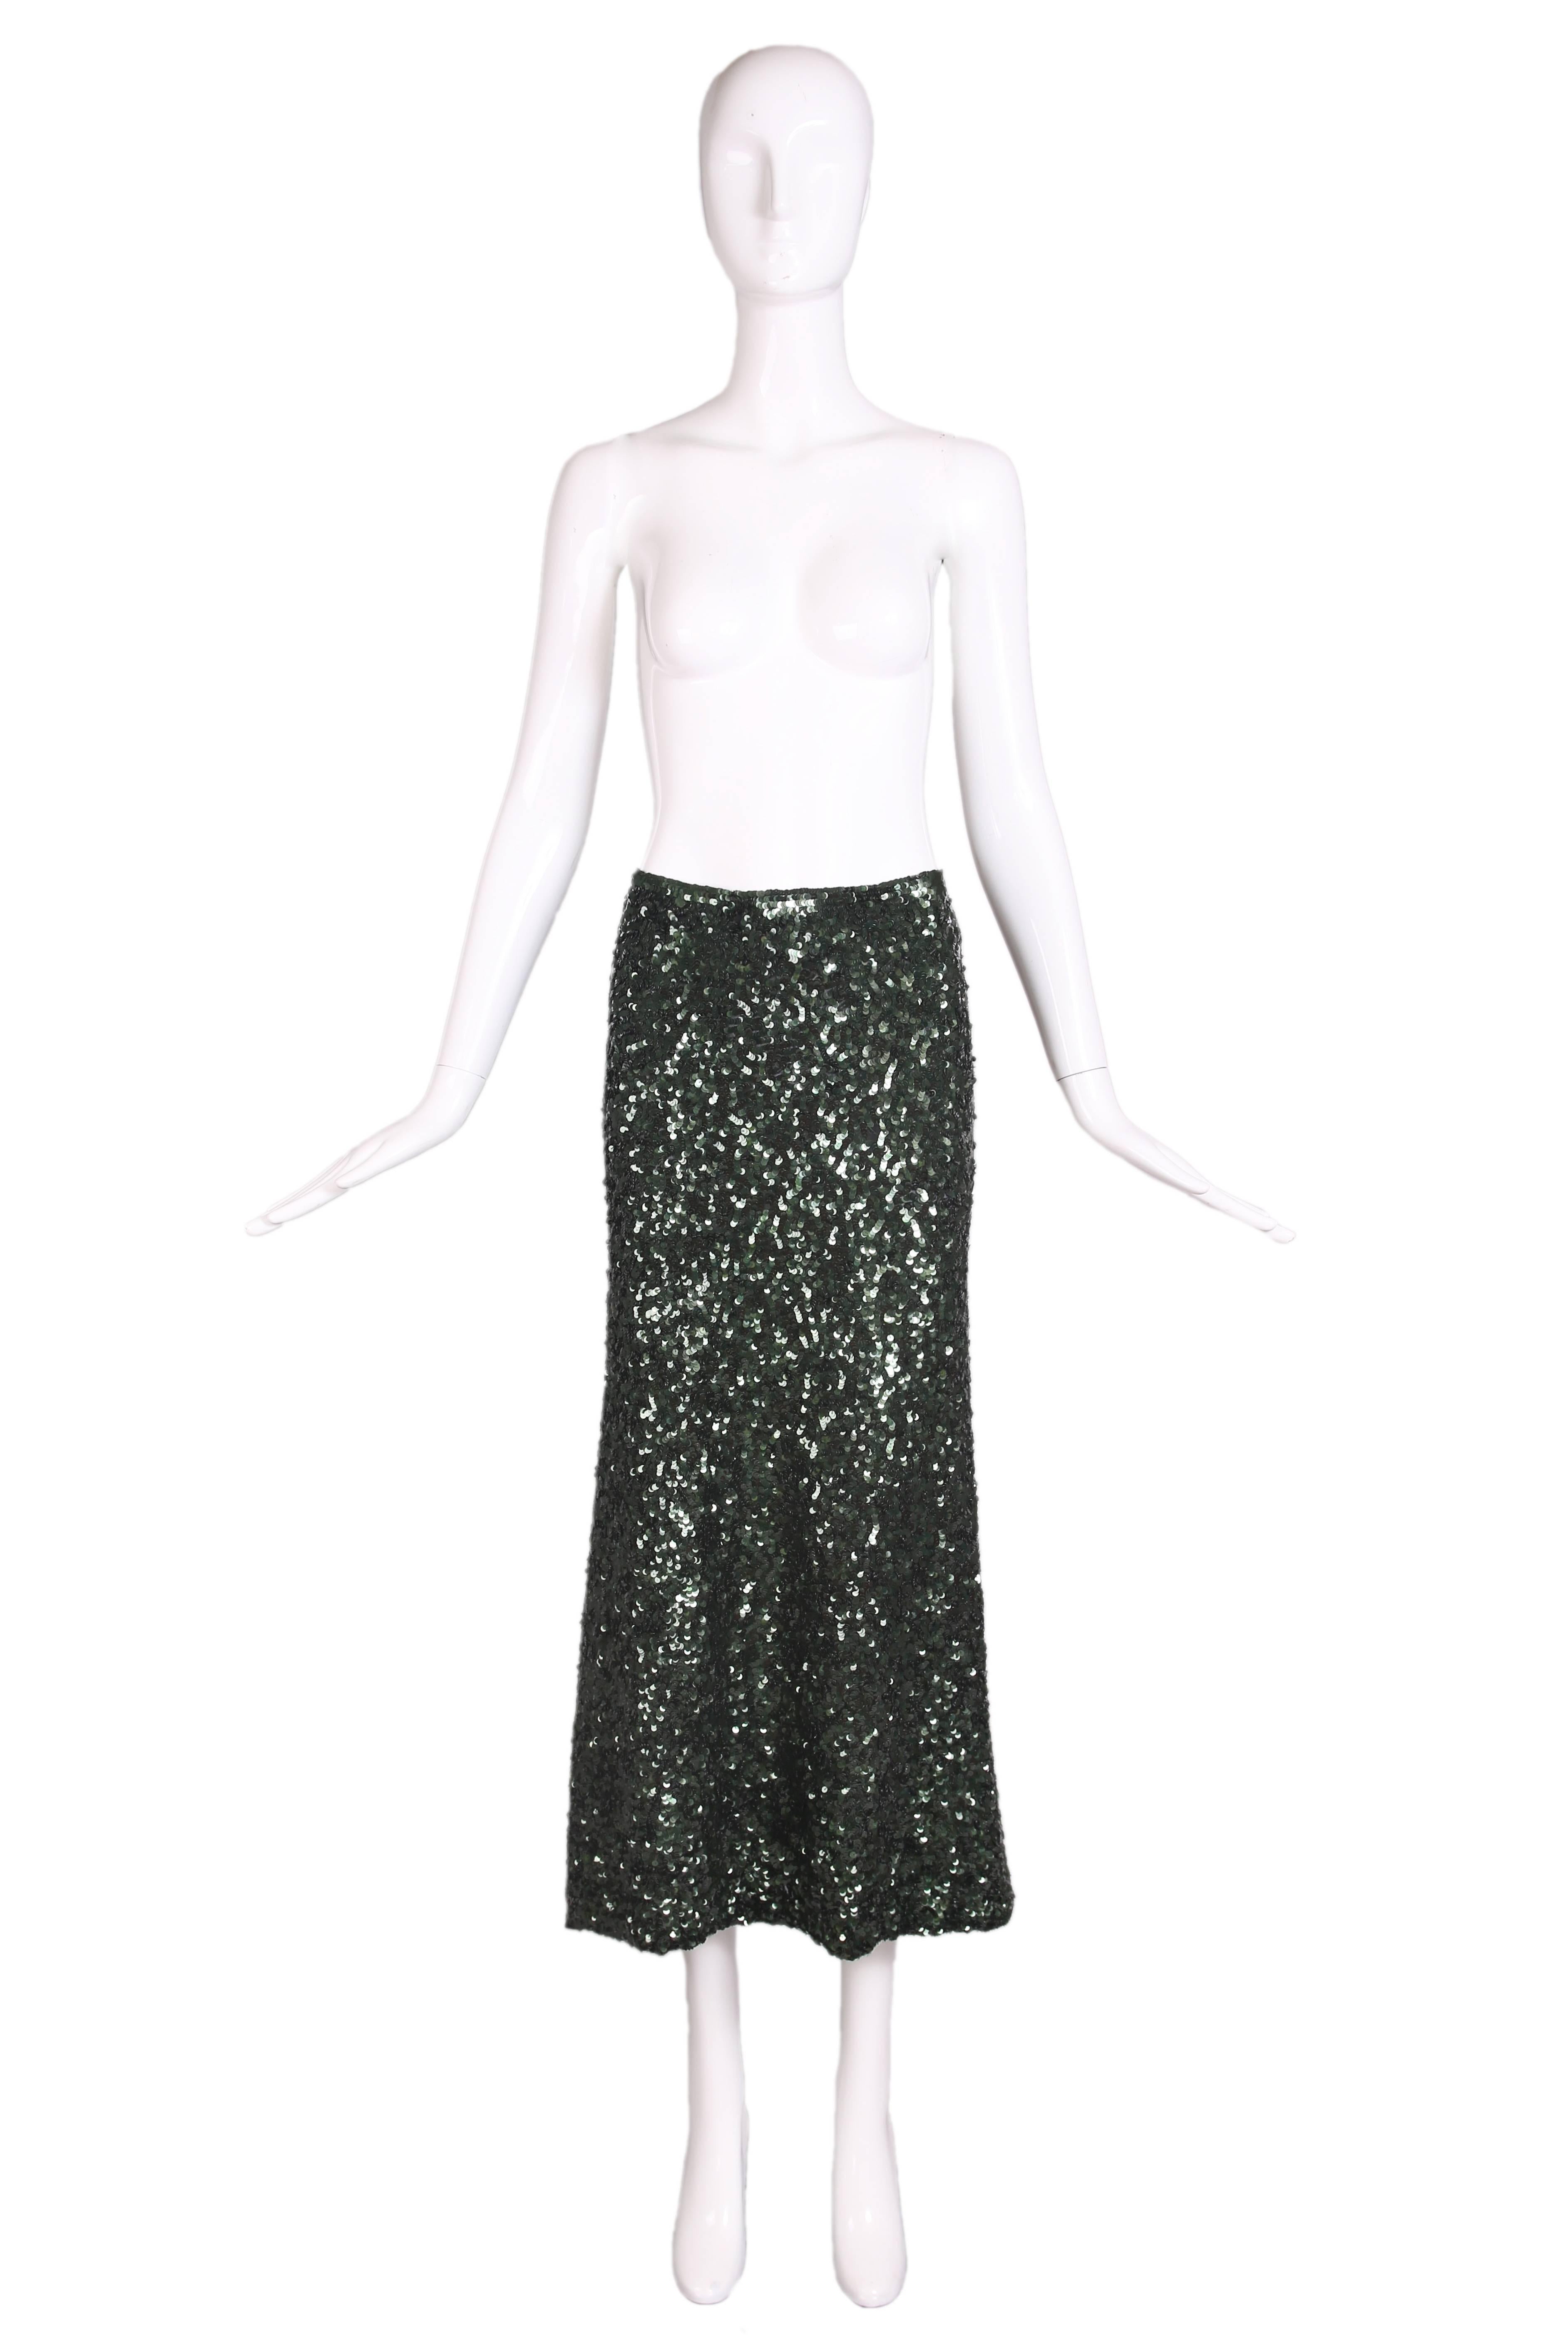 1990's Jean-Paul Gaultier dark green sequin a-line skirt in a stretch jersey fabric. The sequins overlap to form layers of swirls all over. Side zipper closure. In excellent condition. No size tag, please consult measurements.
MEASUREMENTS:
Waist -